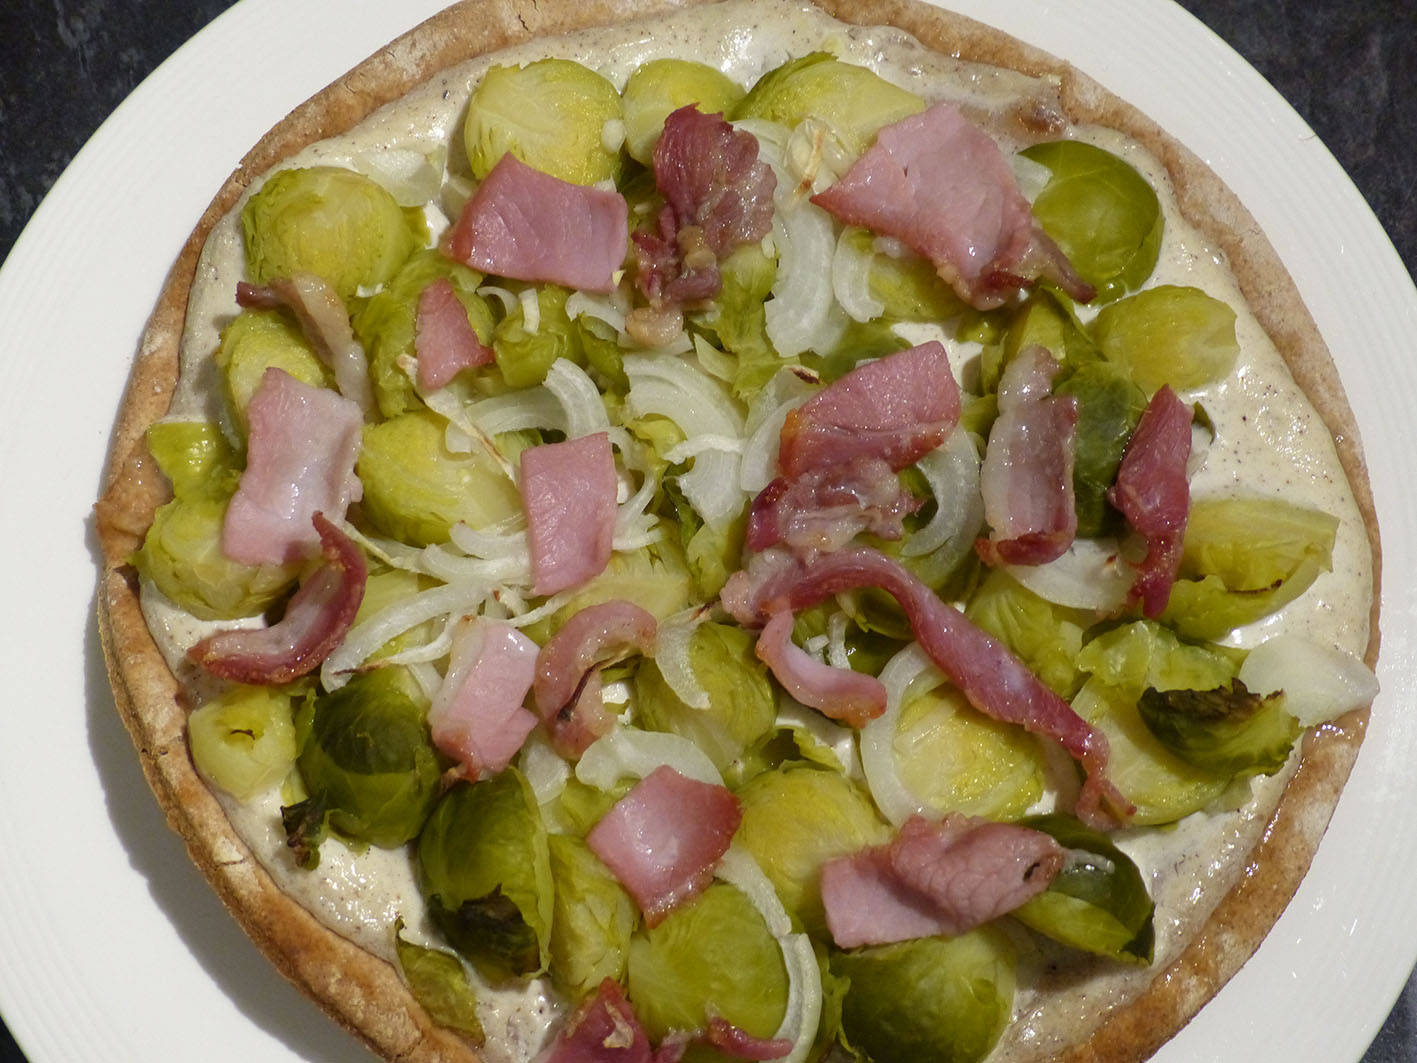 Pizza with brussels sprouts and 'bacon'